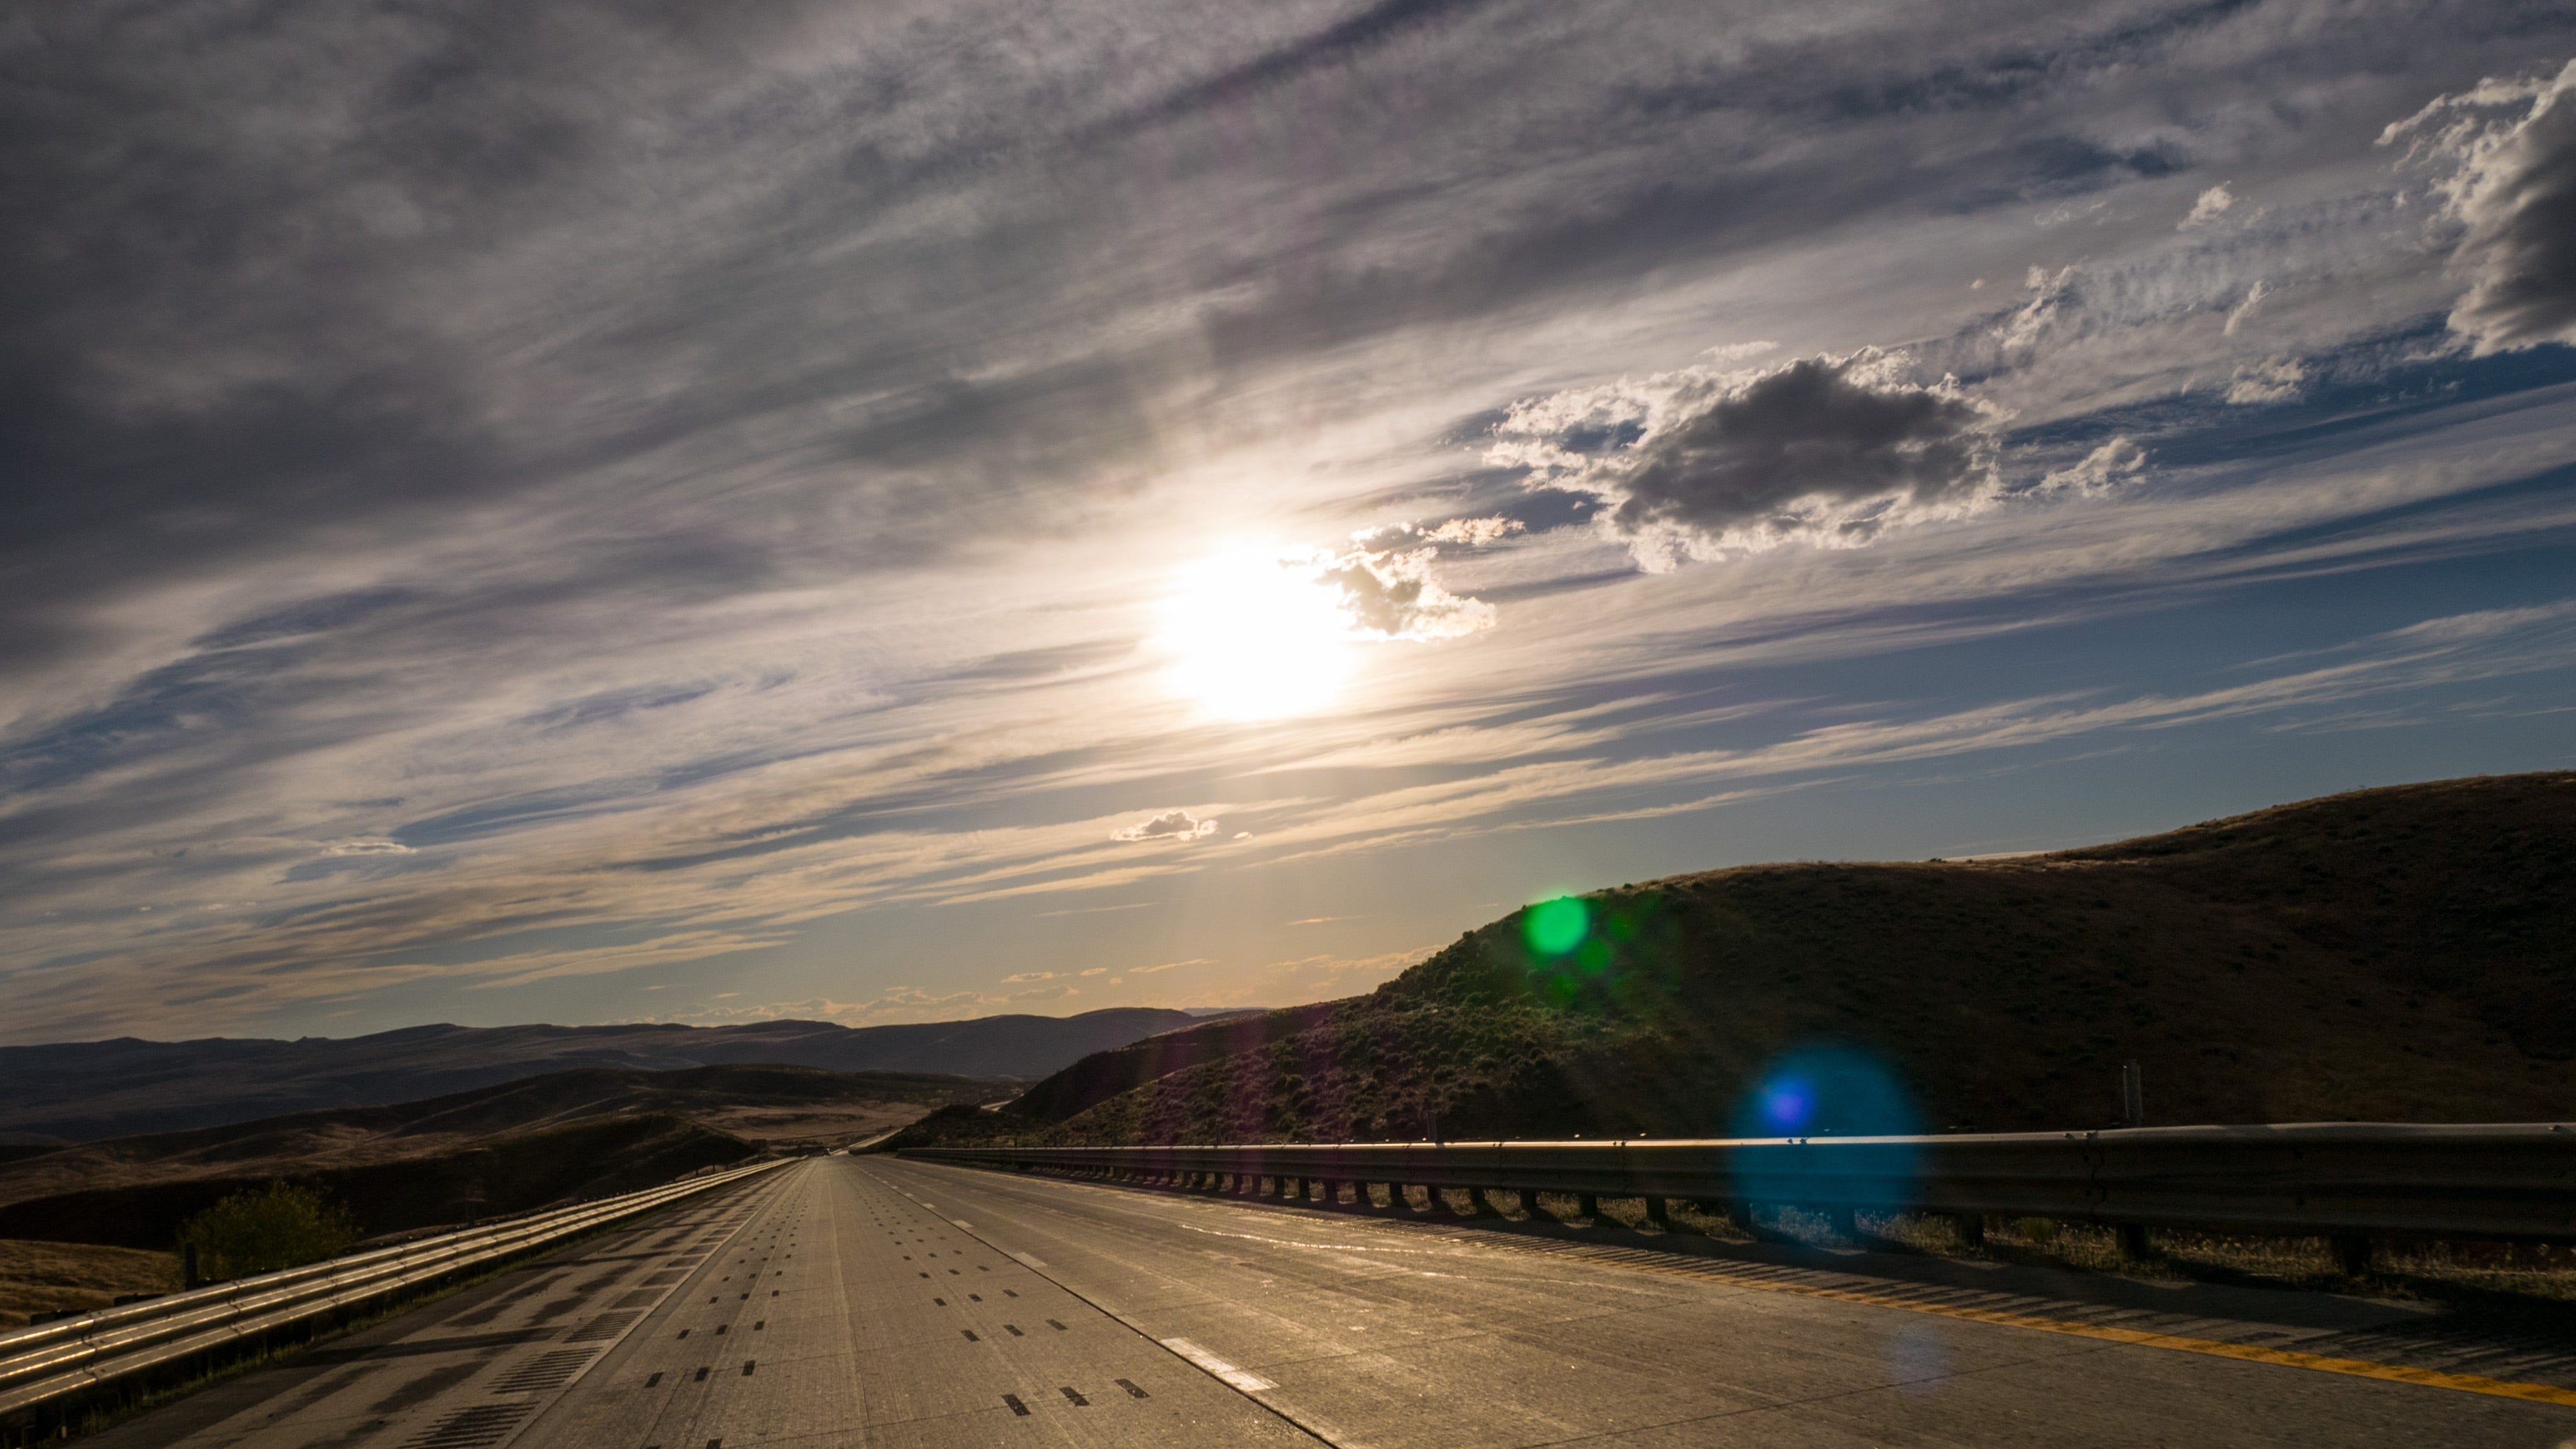 Photograph looking westward along Interstate 80 in Nevada. The road inclines downward to a valley before turning slightly and climbing towards a distant set of rugged mountains. It is late afternoon and the light is low, a strong sun in a blue sky streaked with clouds. The landscape is dark, in silhouette and the sunlight reflects off the asphalt of the highway. The highway guardrail glistens in the strong light.